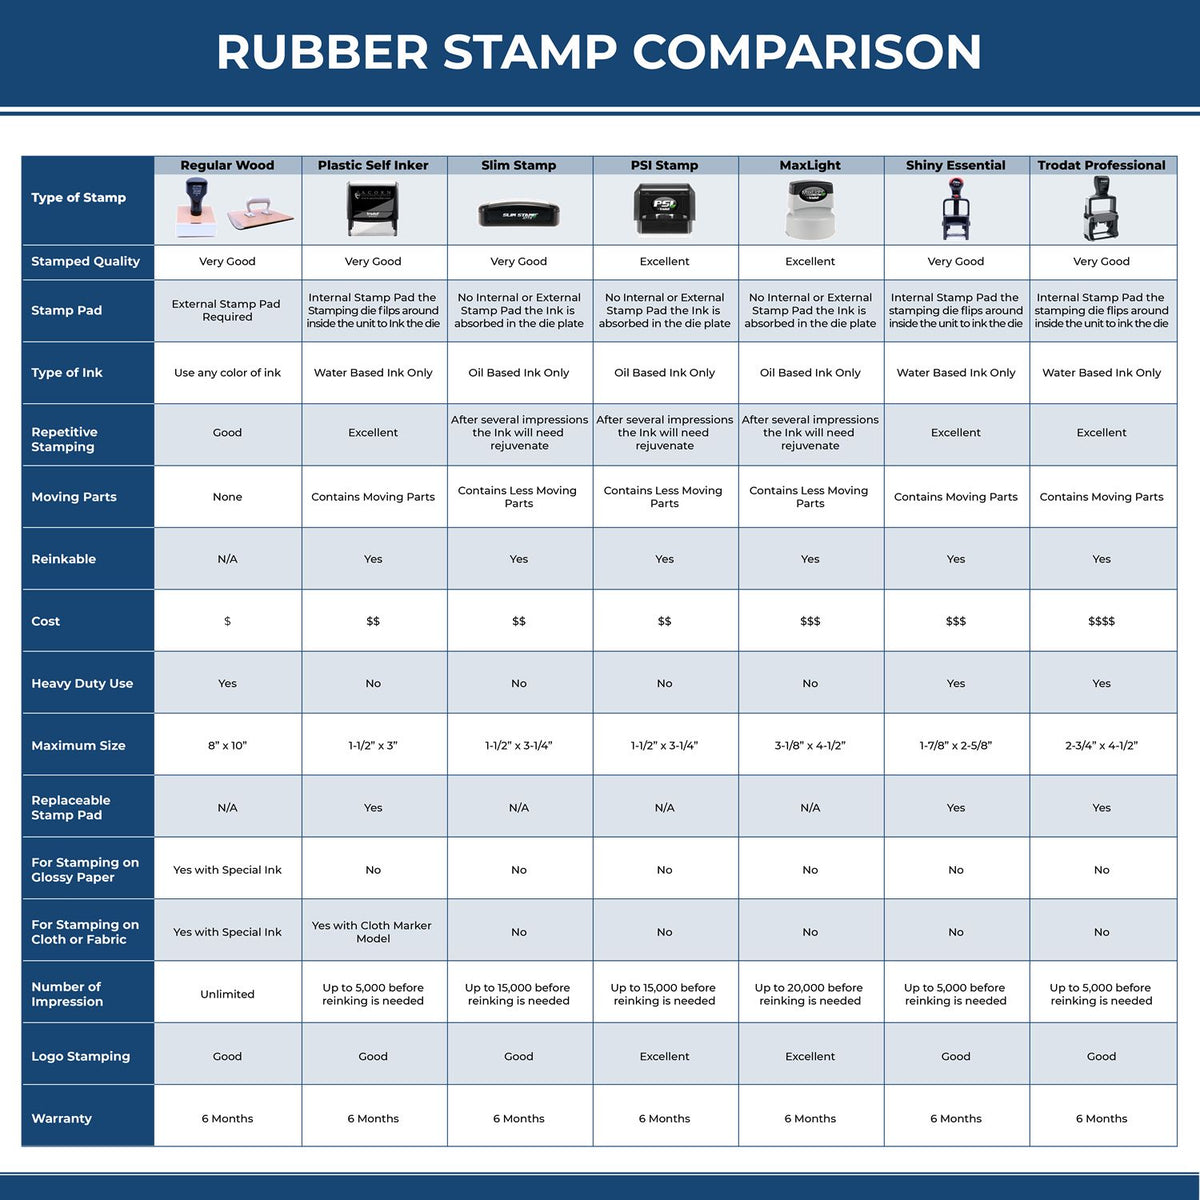 Large Self-Inking Cargado Stamp 5518S Rubber Stamp Comparison